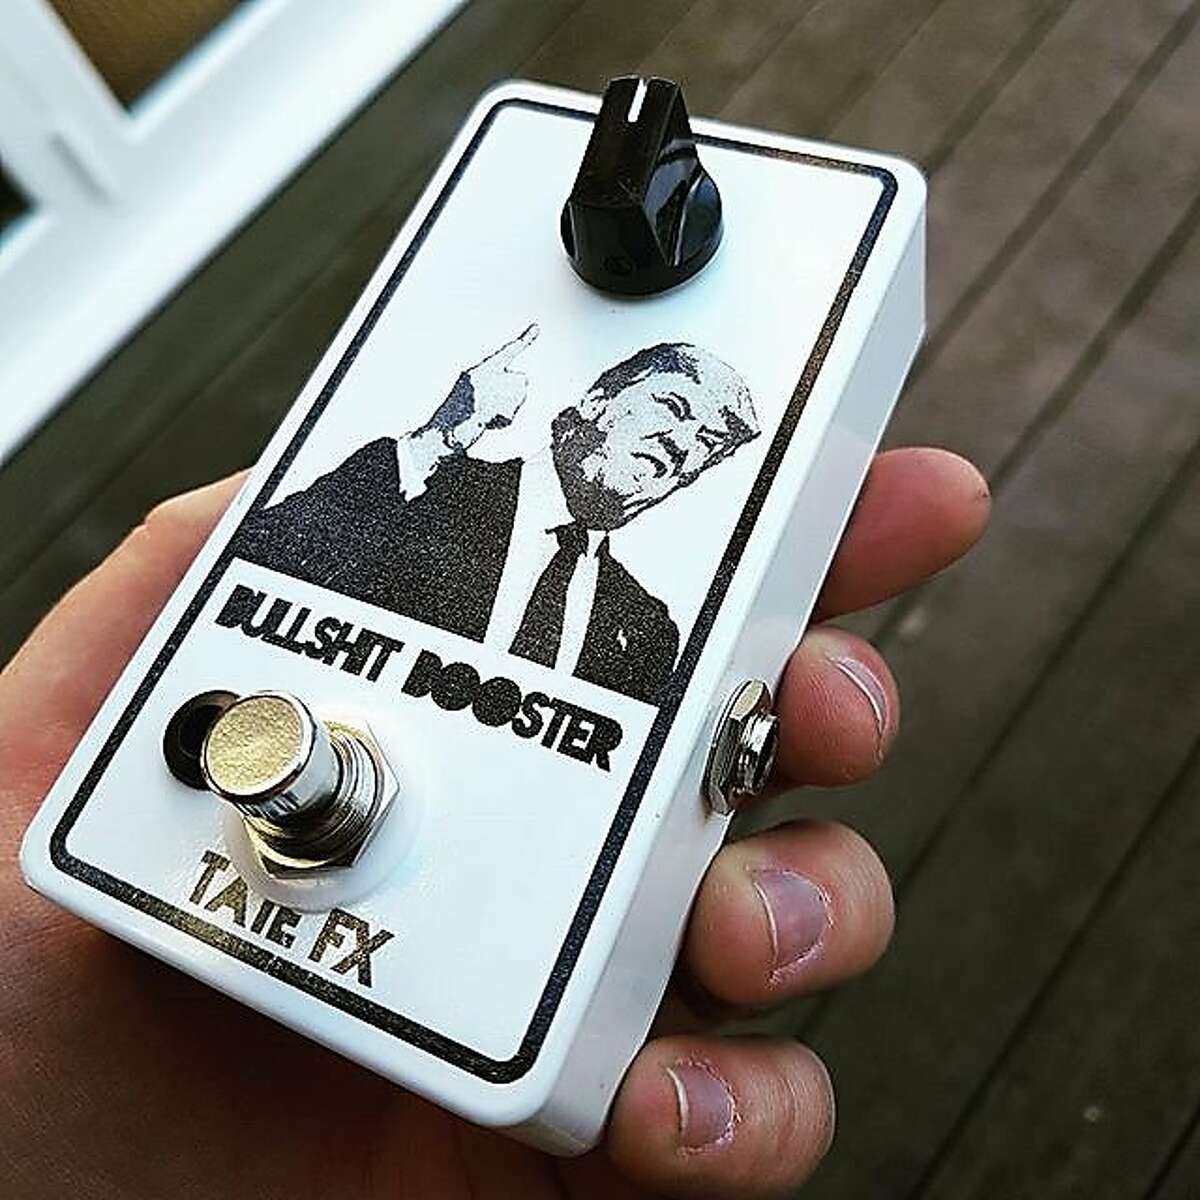 Bullshit Booster by Tate FX of London, England�(from the exhibit �PedalCulture: The Guitar Effects Pedal as Cultural Artifact� at San Francisco State University)